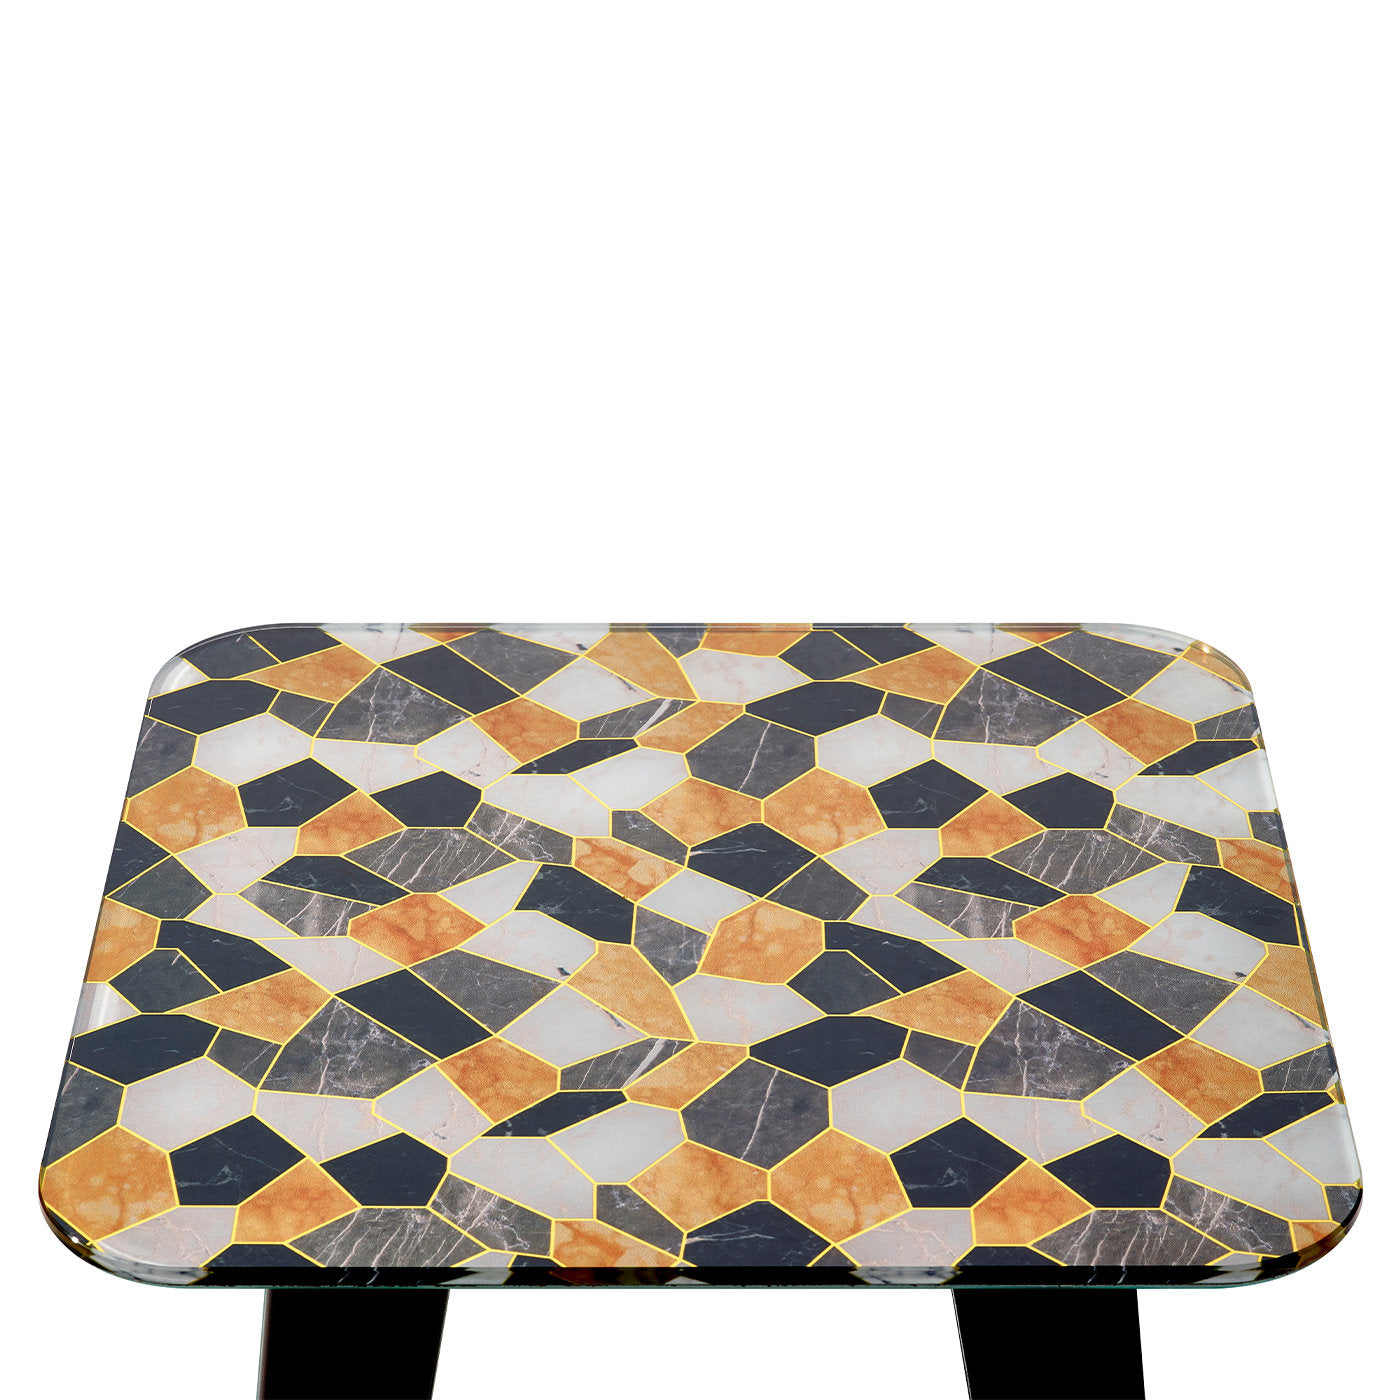 Owen Tall Square Side Table with Orange and Black Top - Alternative view 2